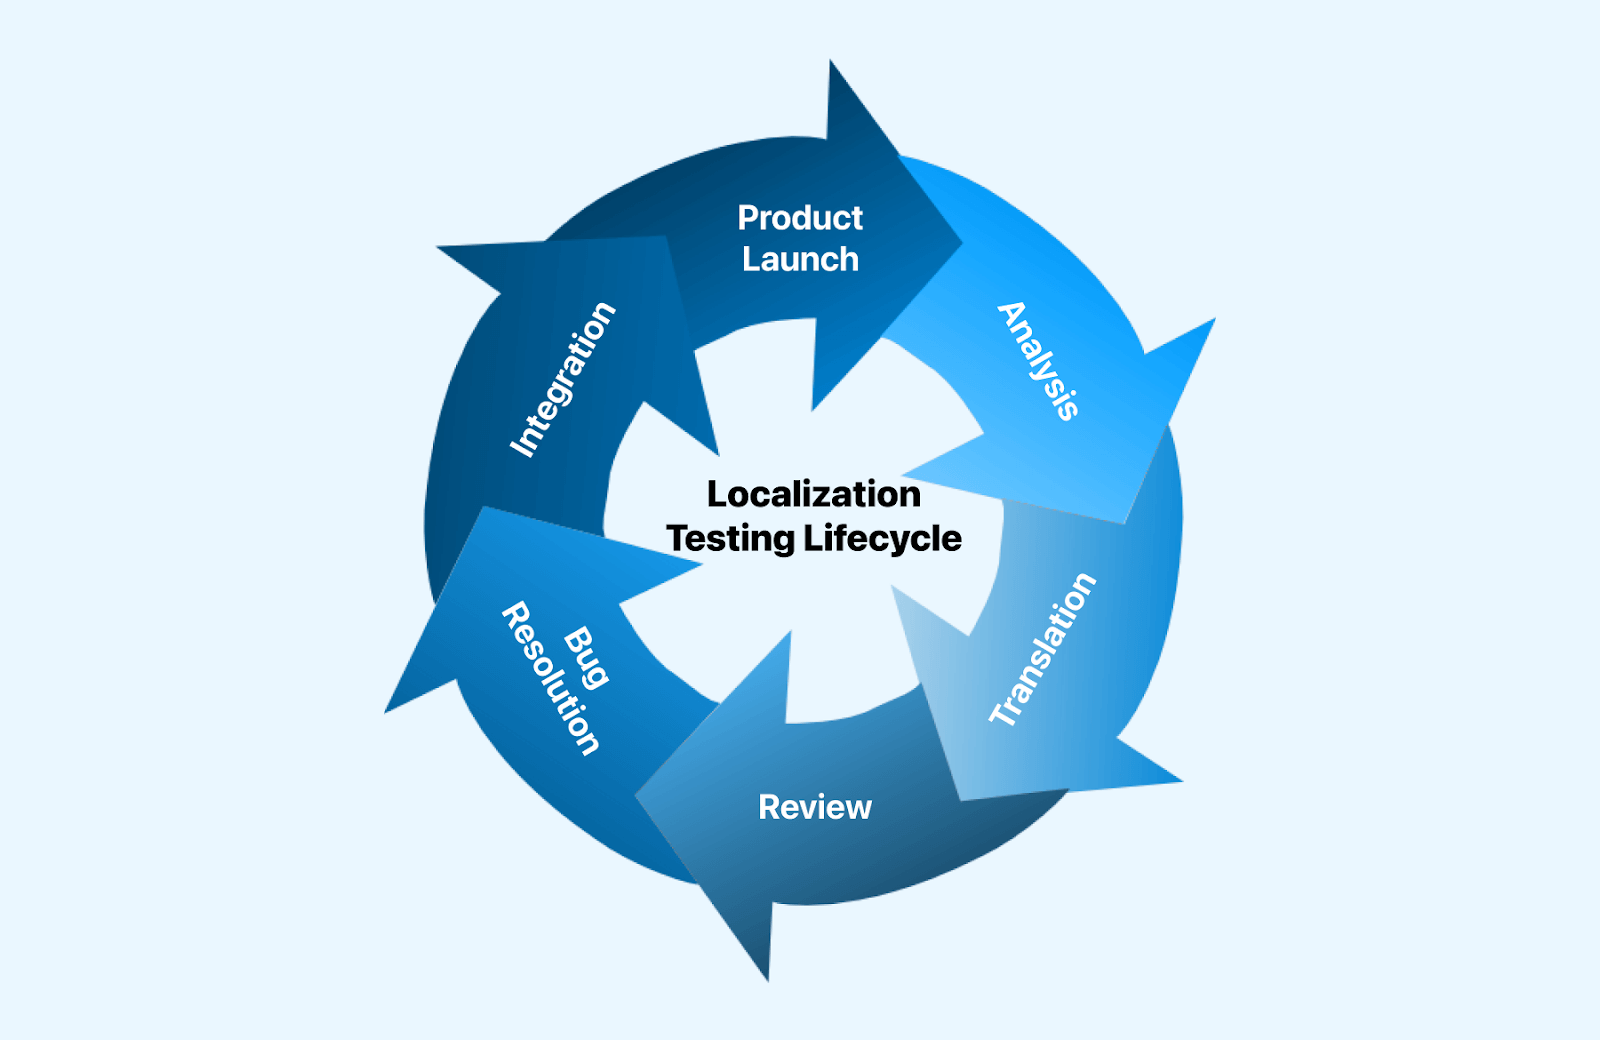 Localization Testing Lifecycle